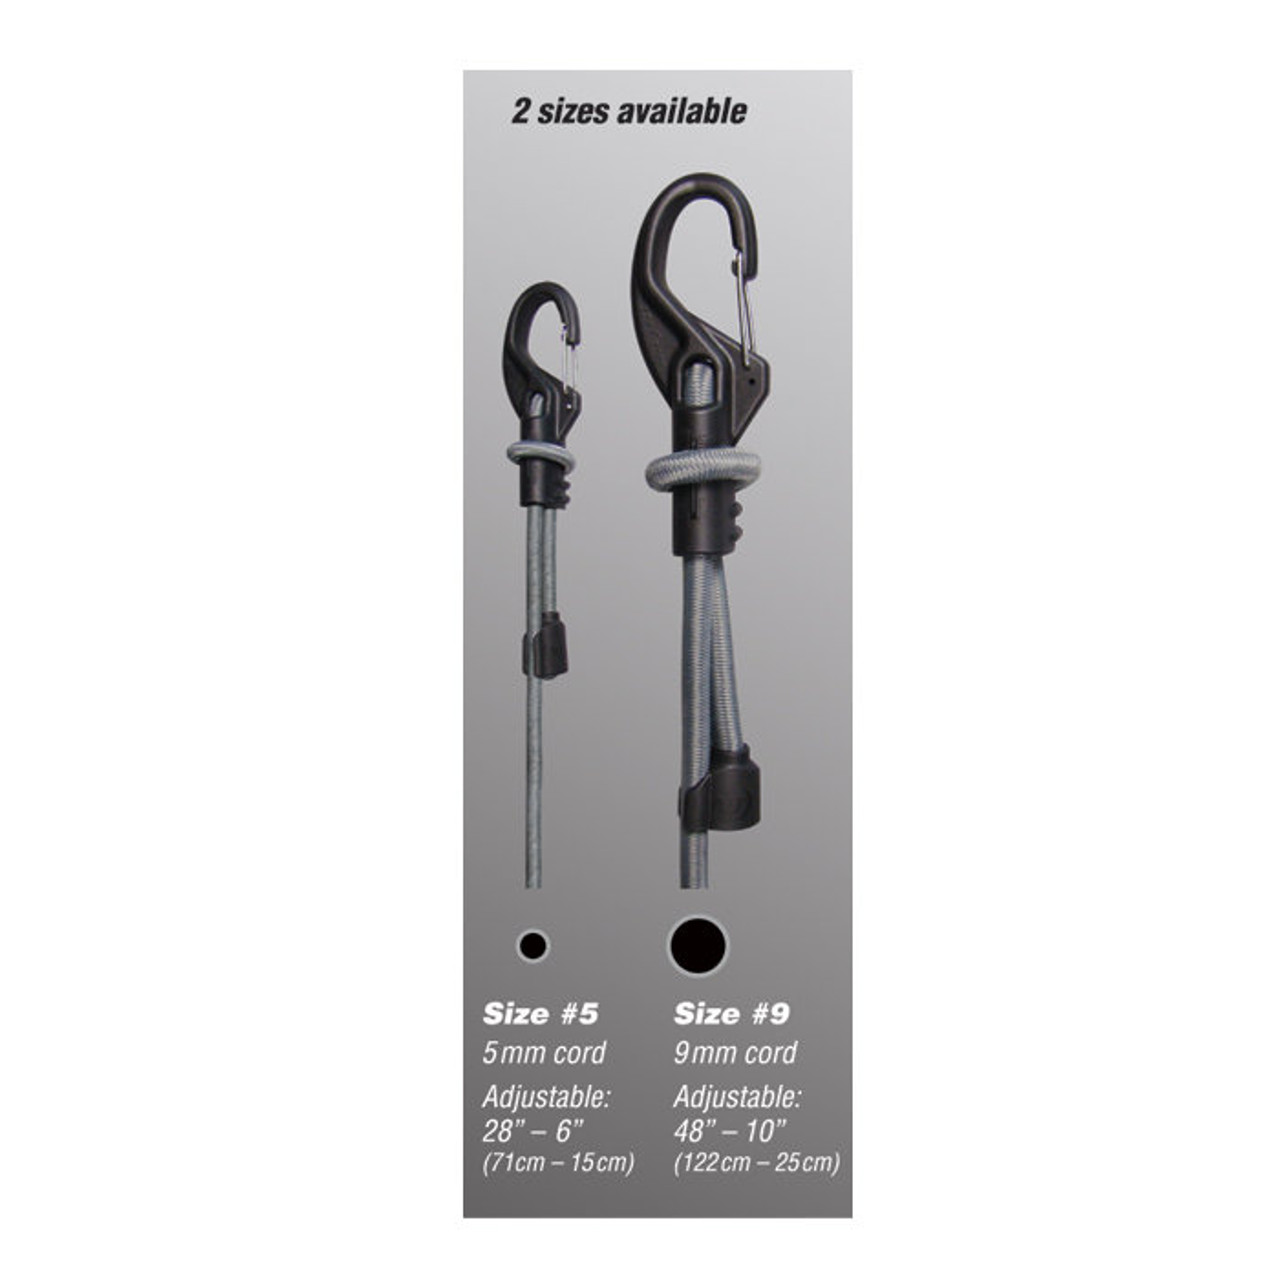 Nite Ize Large KnotBone Adjustable Bungee Cord, With Carabiner Clip End +  Adjustable Length, Size #9